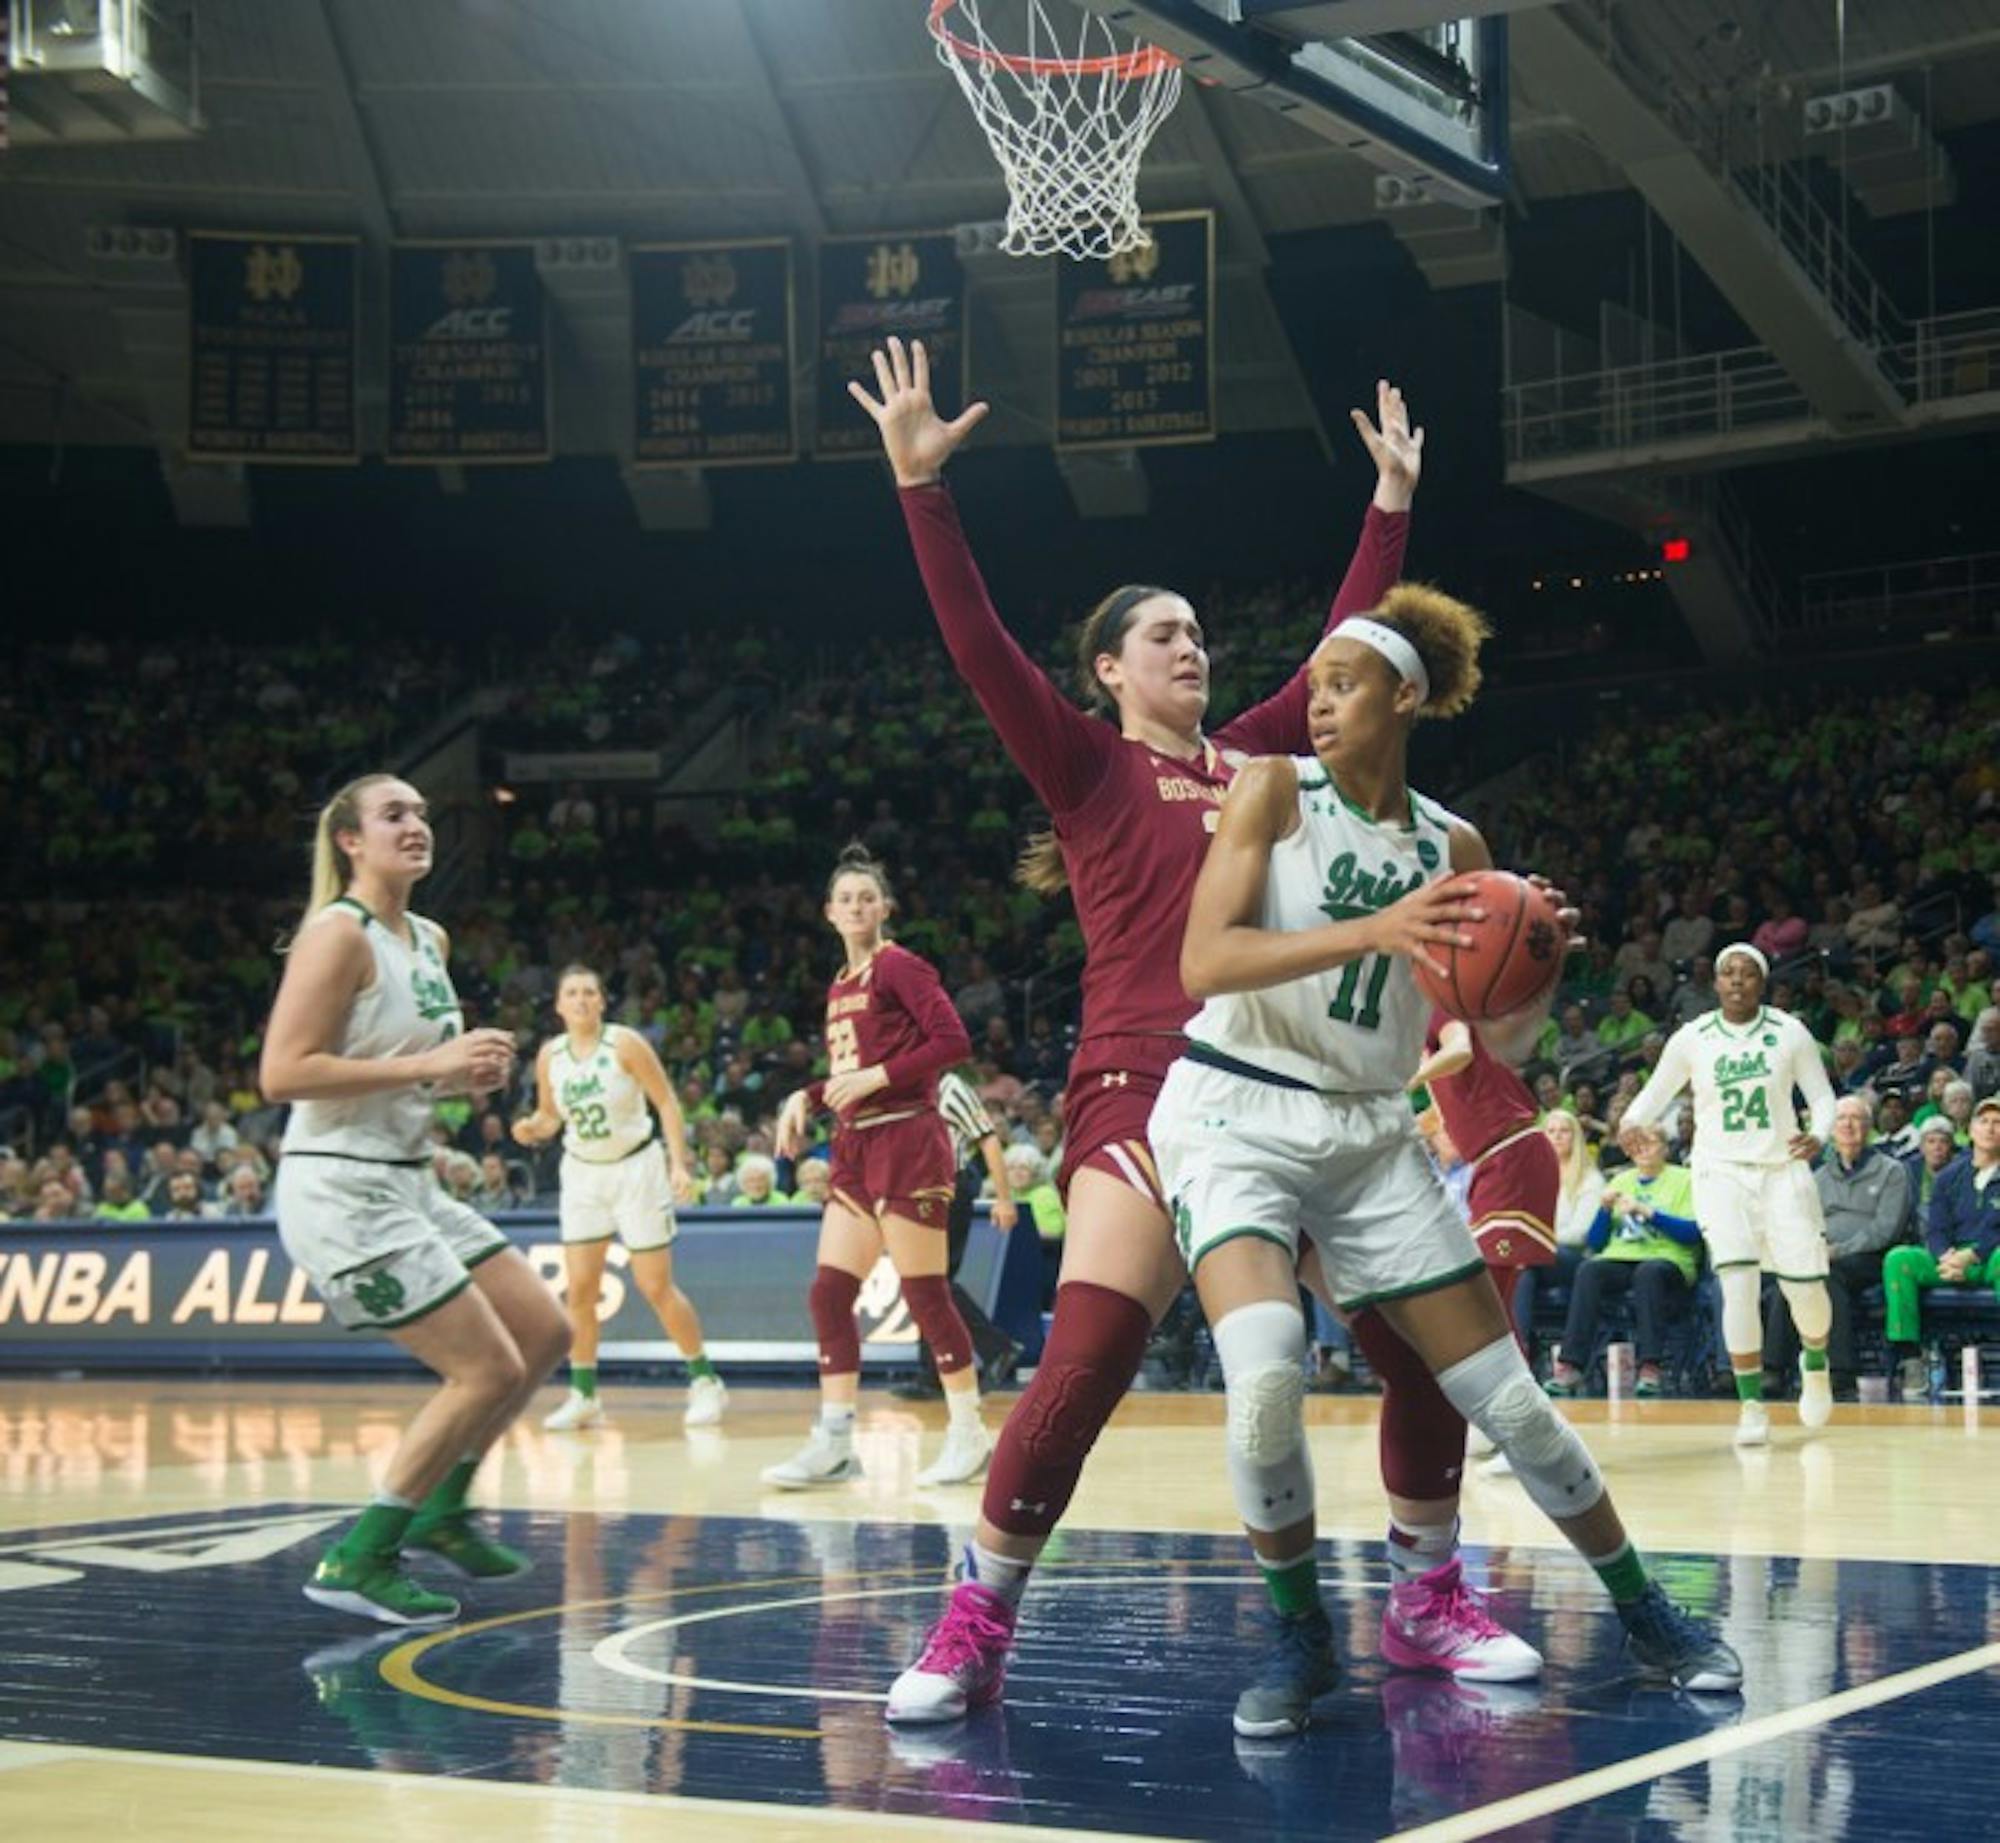 Junior forward Brianna Turner spins around a defender on the baseline during Notre Dame’s 82-45 win over Boston College on Thursday at Purcell Pavilion.